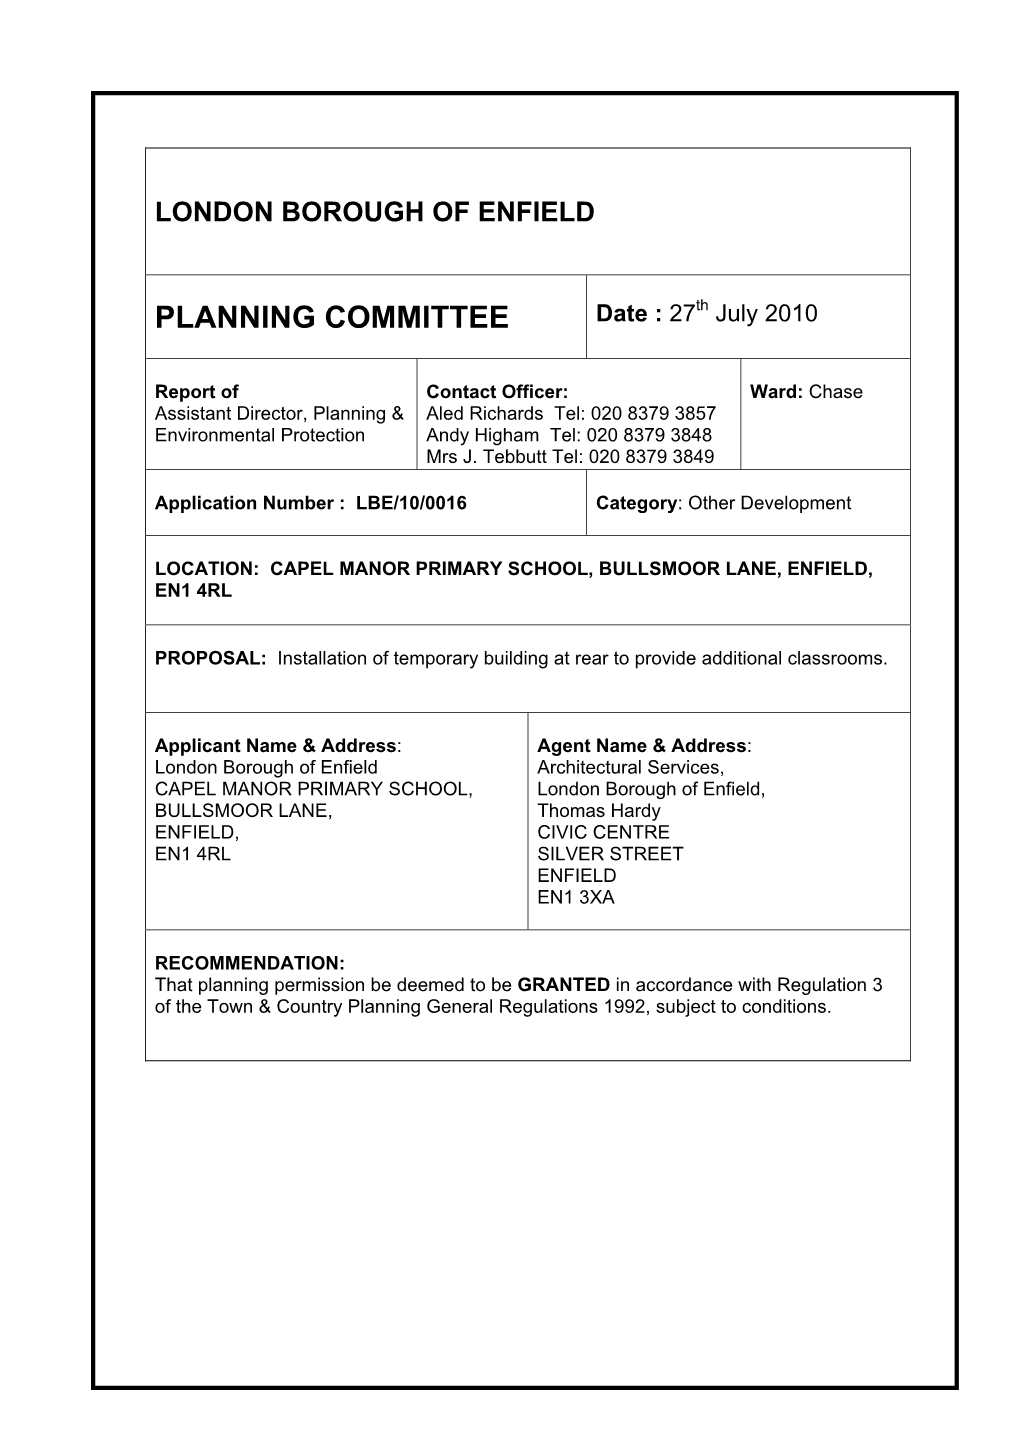 PLANNING COMMITTEE Date : 27Th July 2010